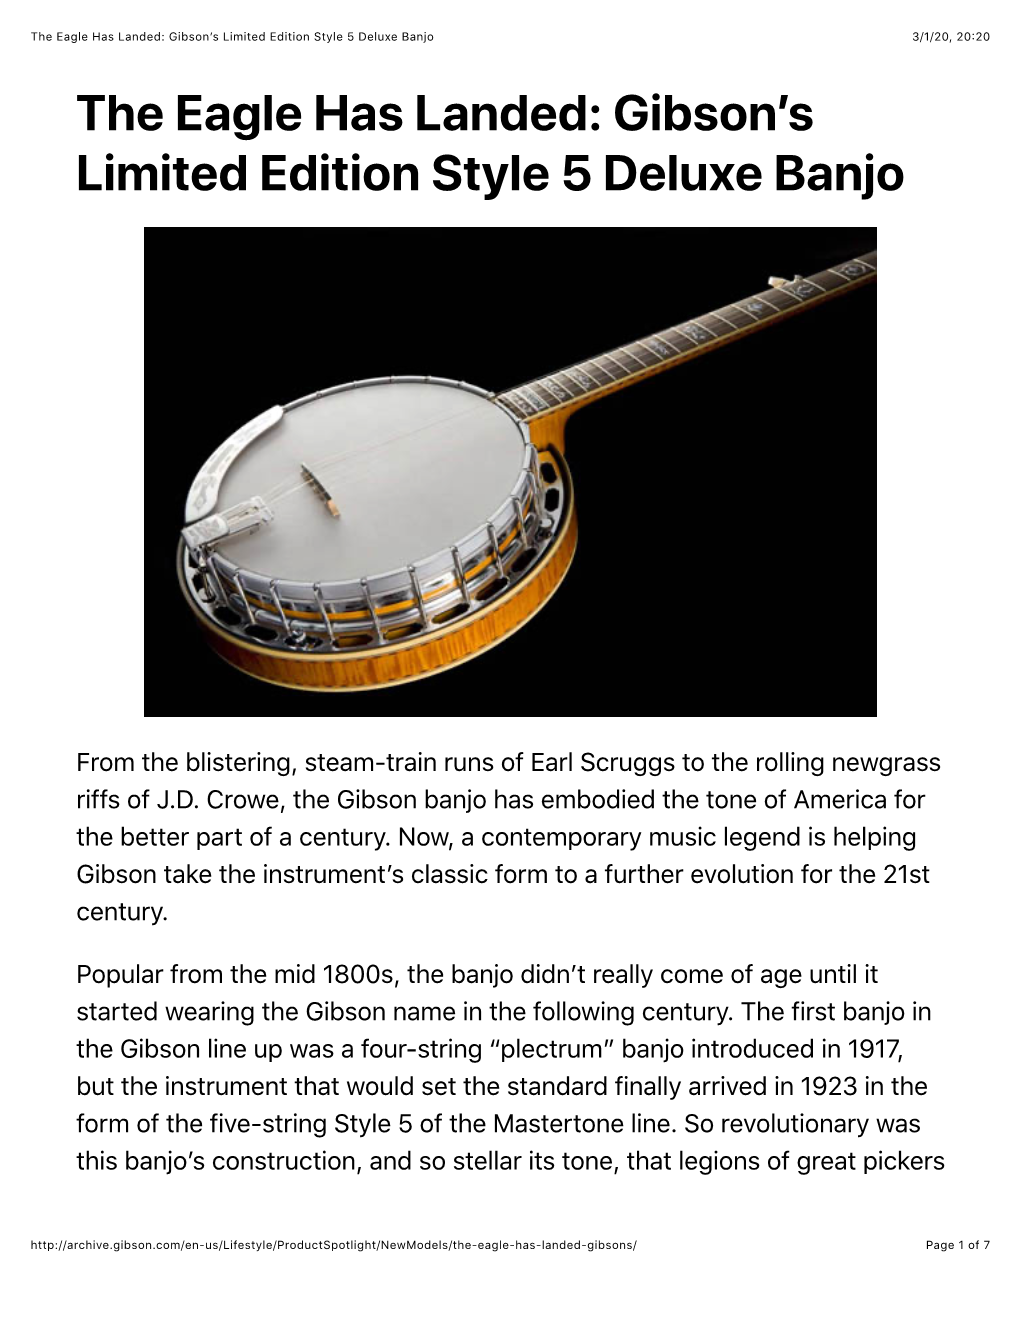 The Eagle Has Landed: Gibson's Limited Edition Style 5 Deluxe Banjo